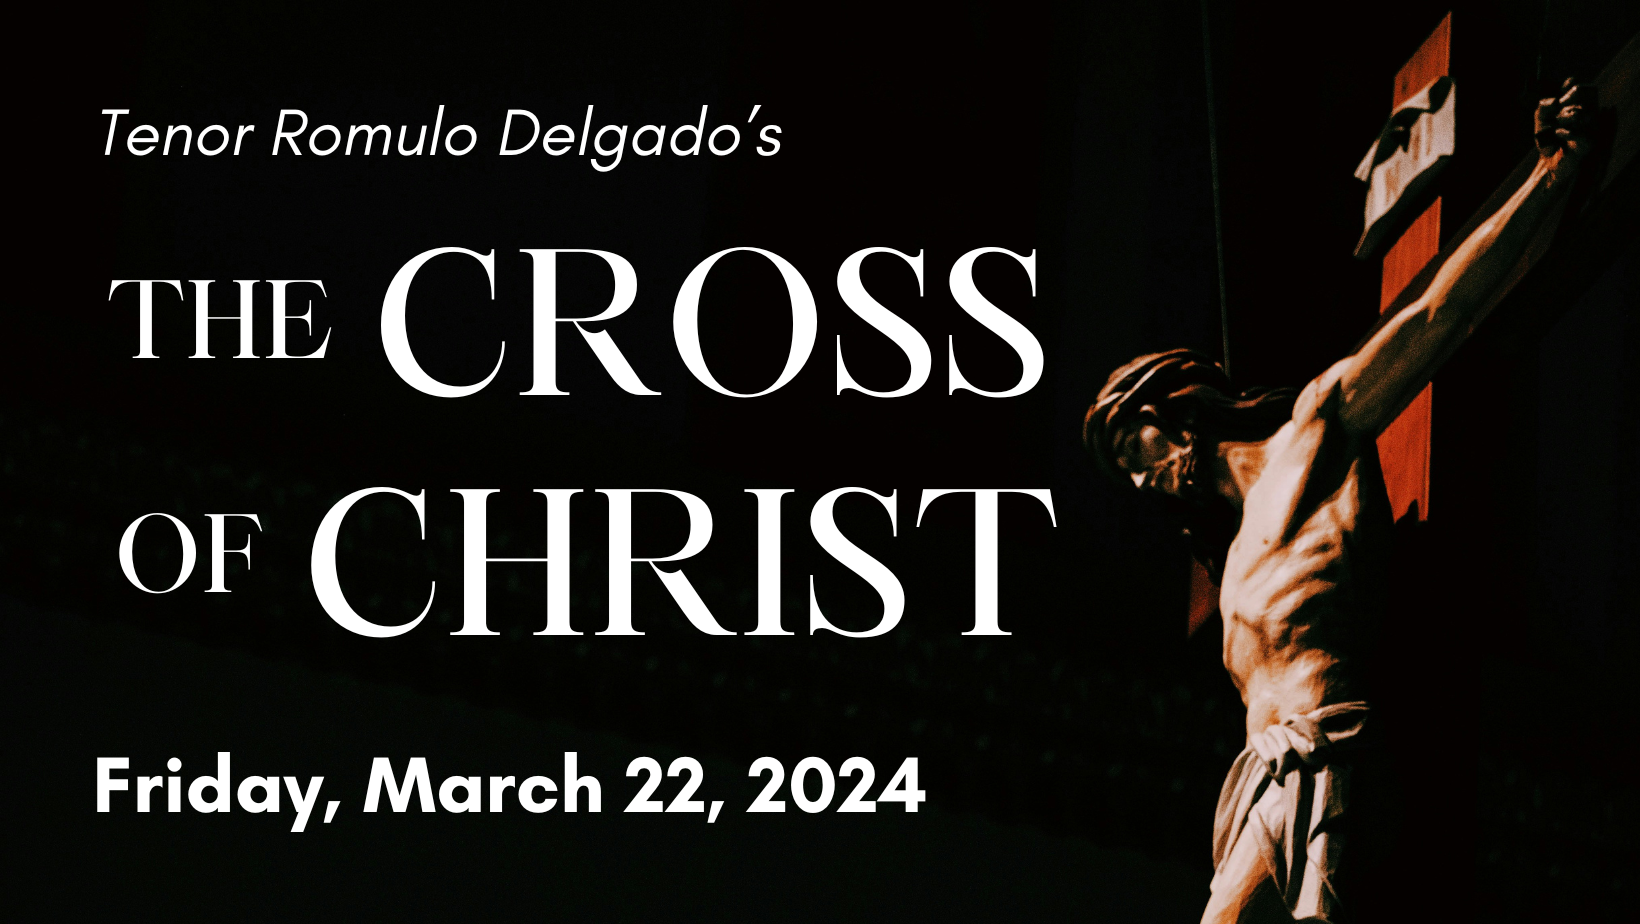 A photo of a crucifix in the Dark advertizing the Cross of Christ Oratorio on Friday, March 22nd, 2024 at St. John the Evangelist Church